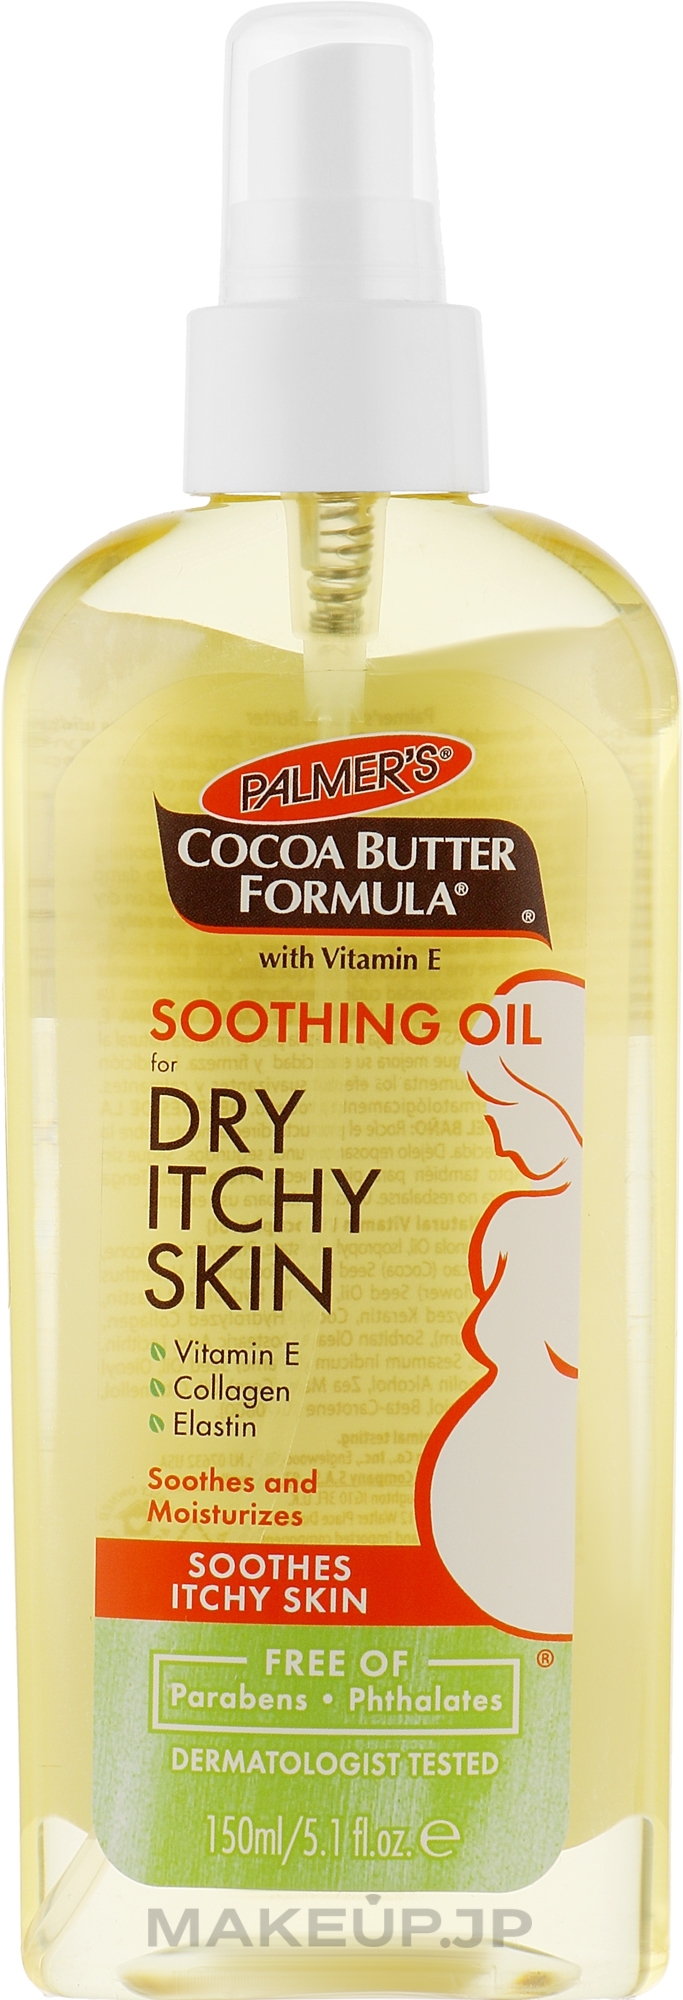 Soothing Body Oil - Palmer's Cocoa Butter Formula Soothing Oil — photo 150 ml